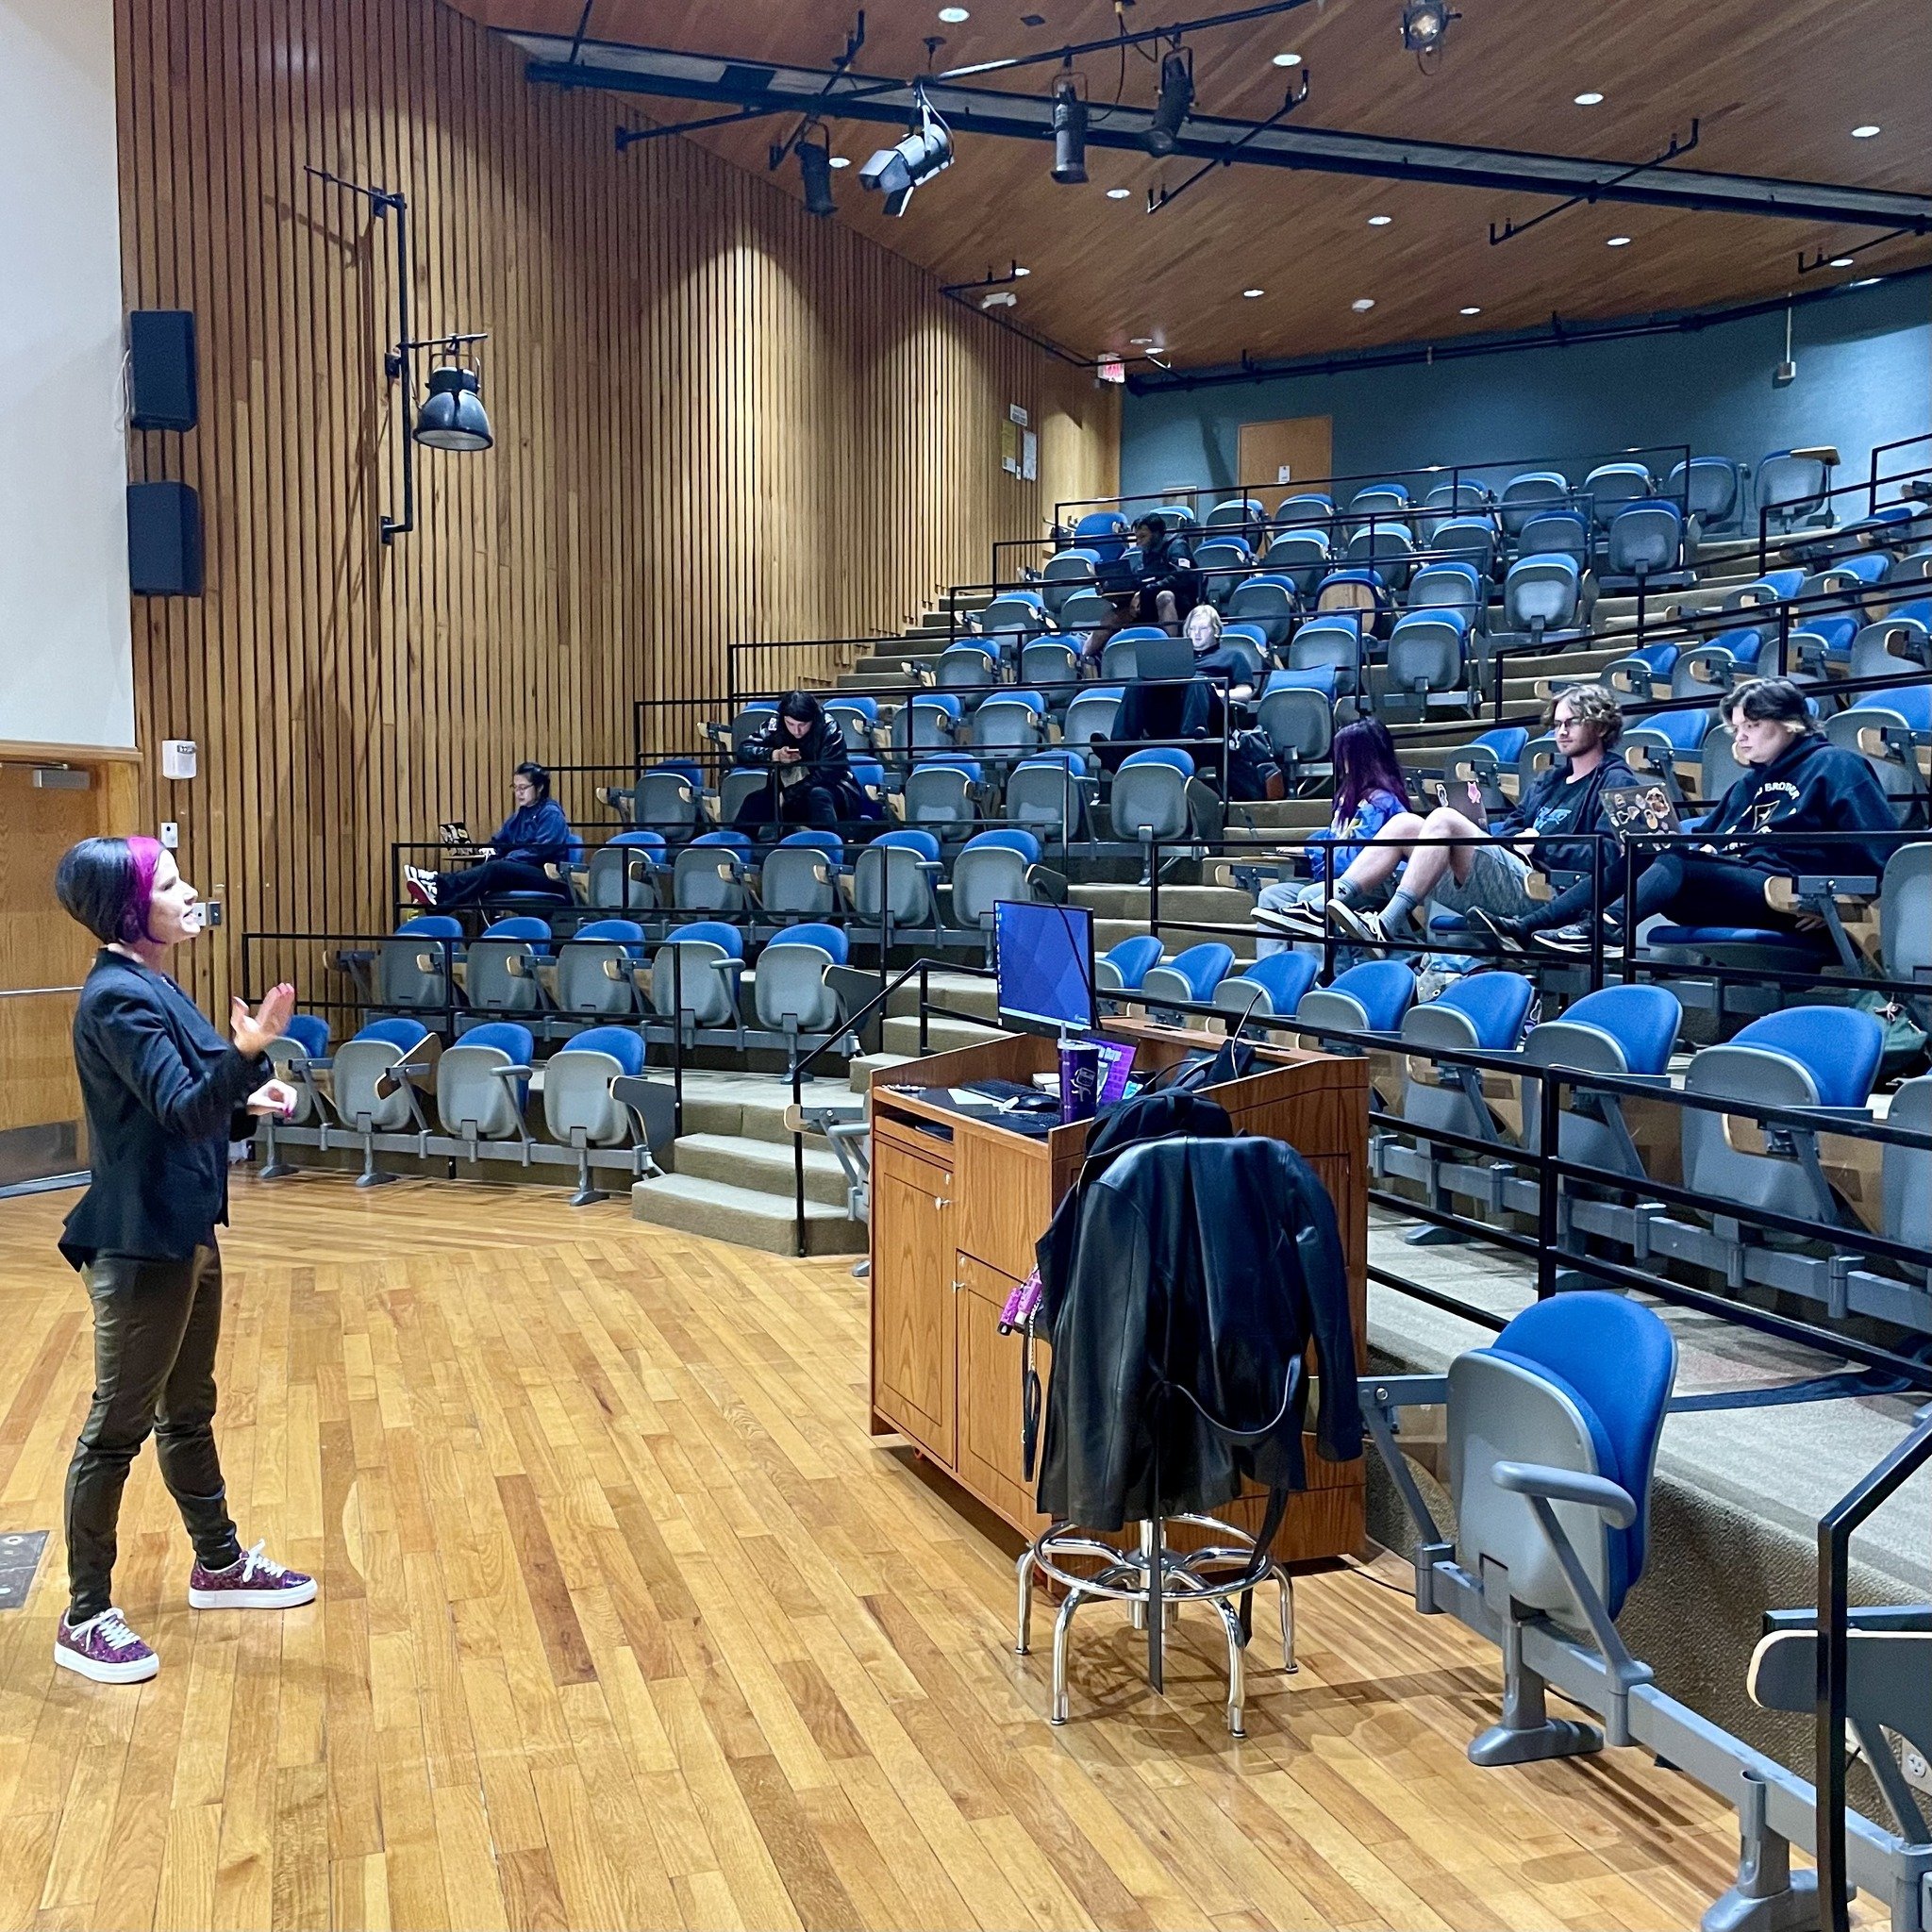 Such a fun evening speaking to design students at Johnson County Community College last night!

(There were way more people in this auditorium than you can see. Promise! lol)

We tackled everything from mindset and motivation to pricing and finding w